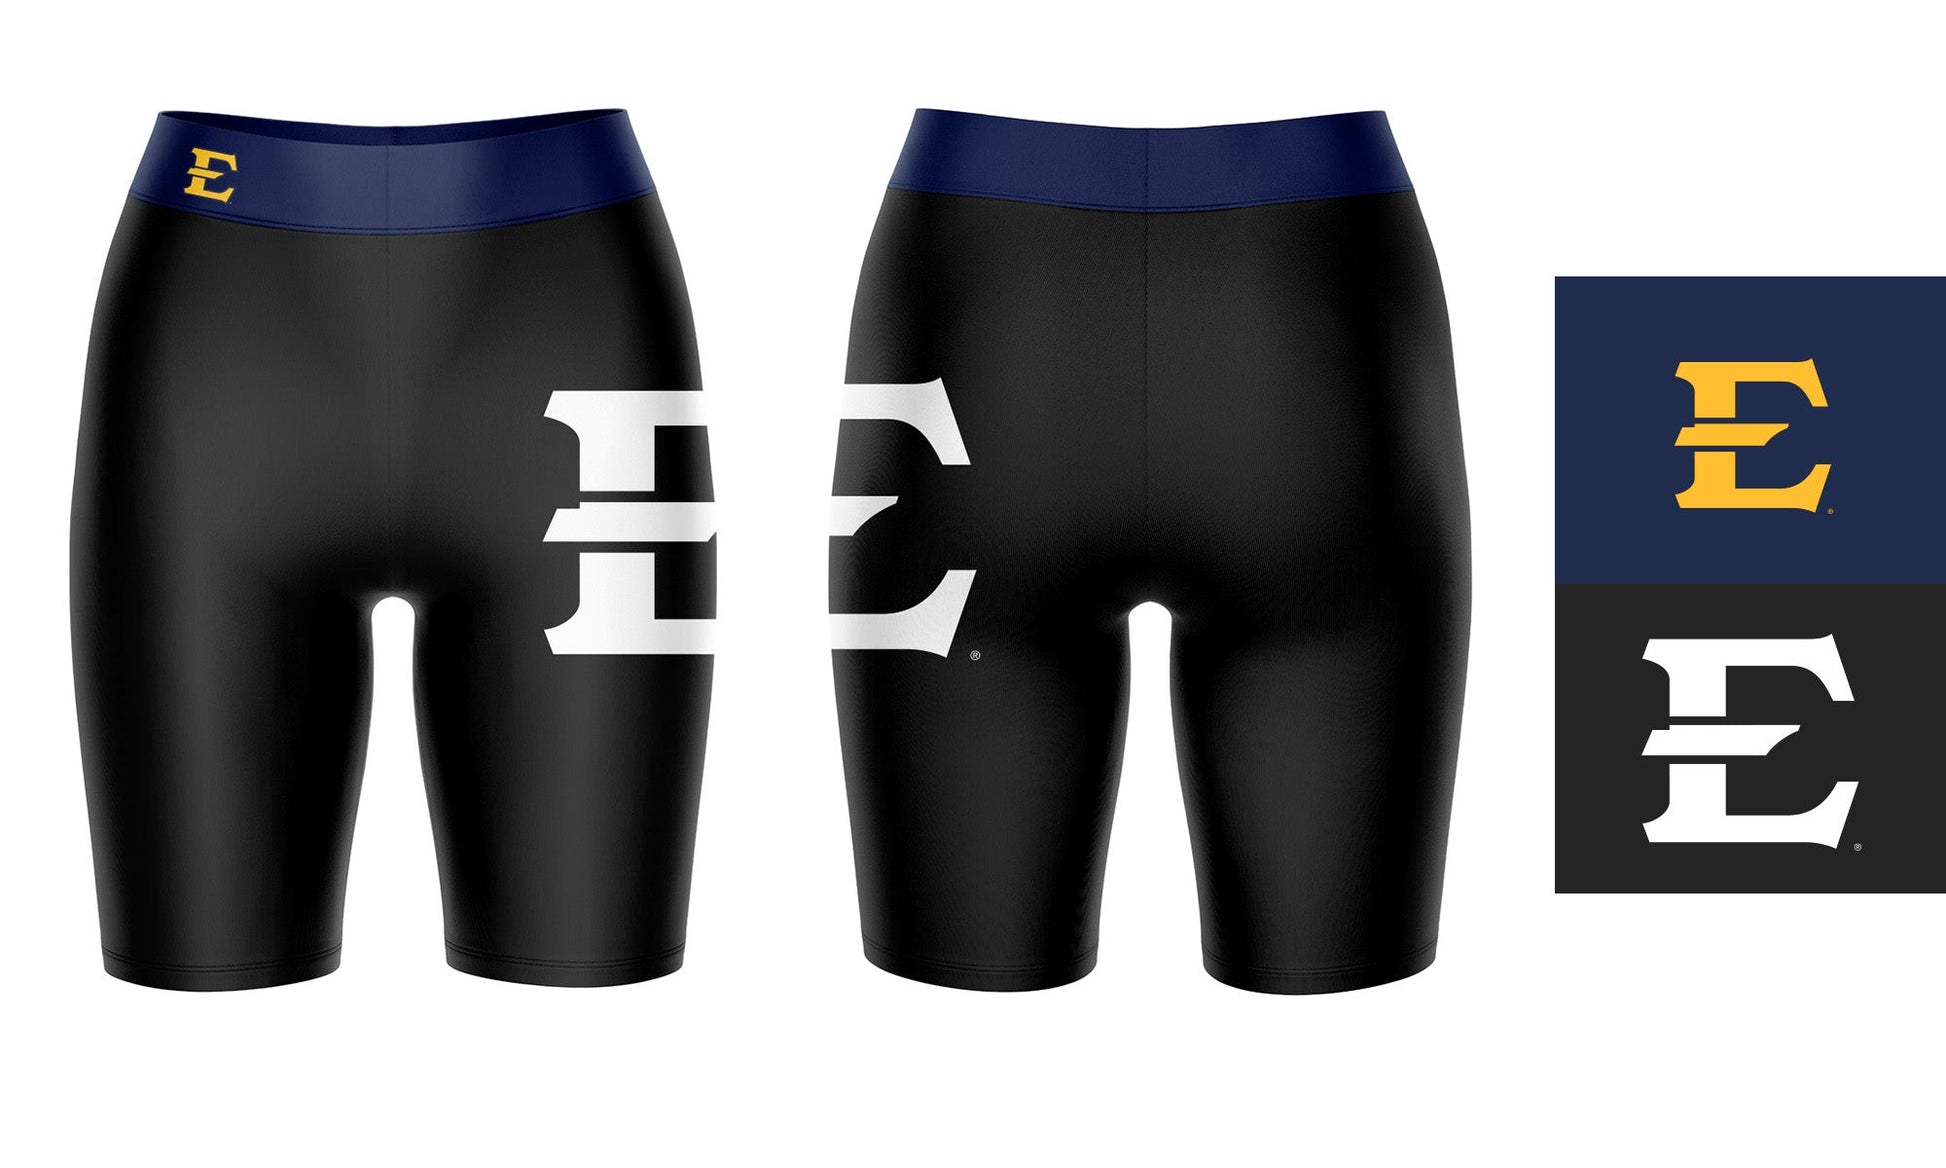 ETSU Buccaneers Vive La Fete Game Day Logo on Thigh and Waistband Black and Navy Women Bike Short 9 Inseam"